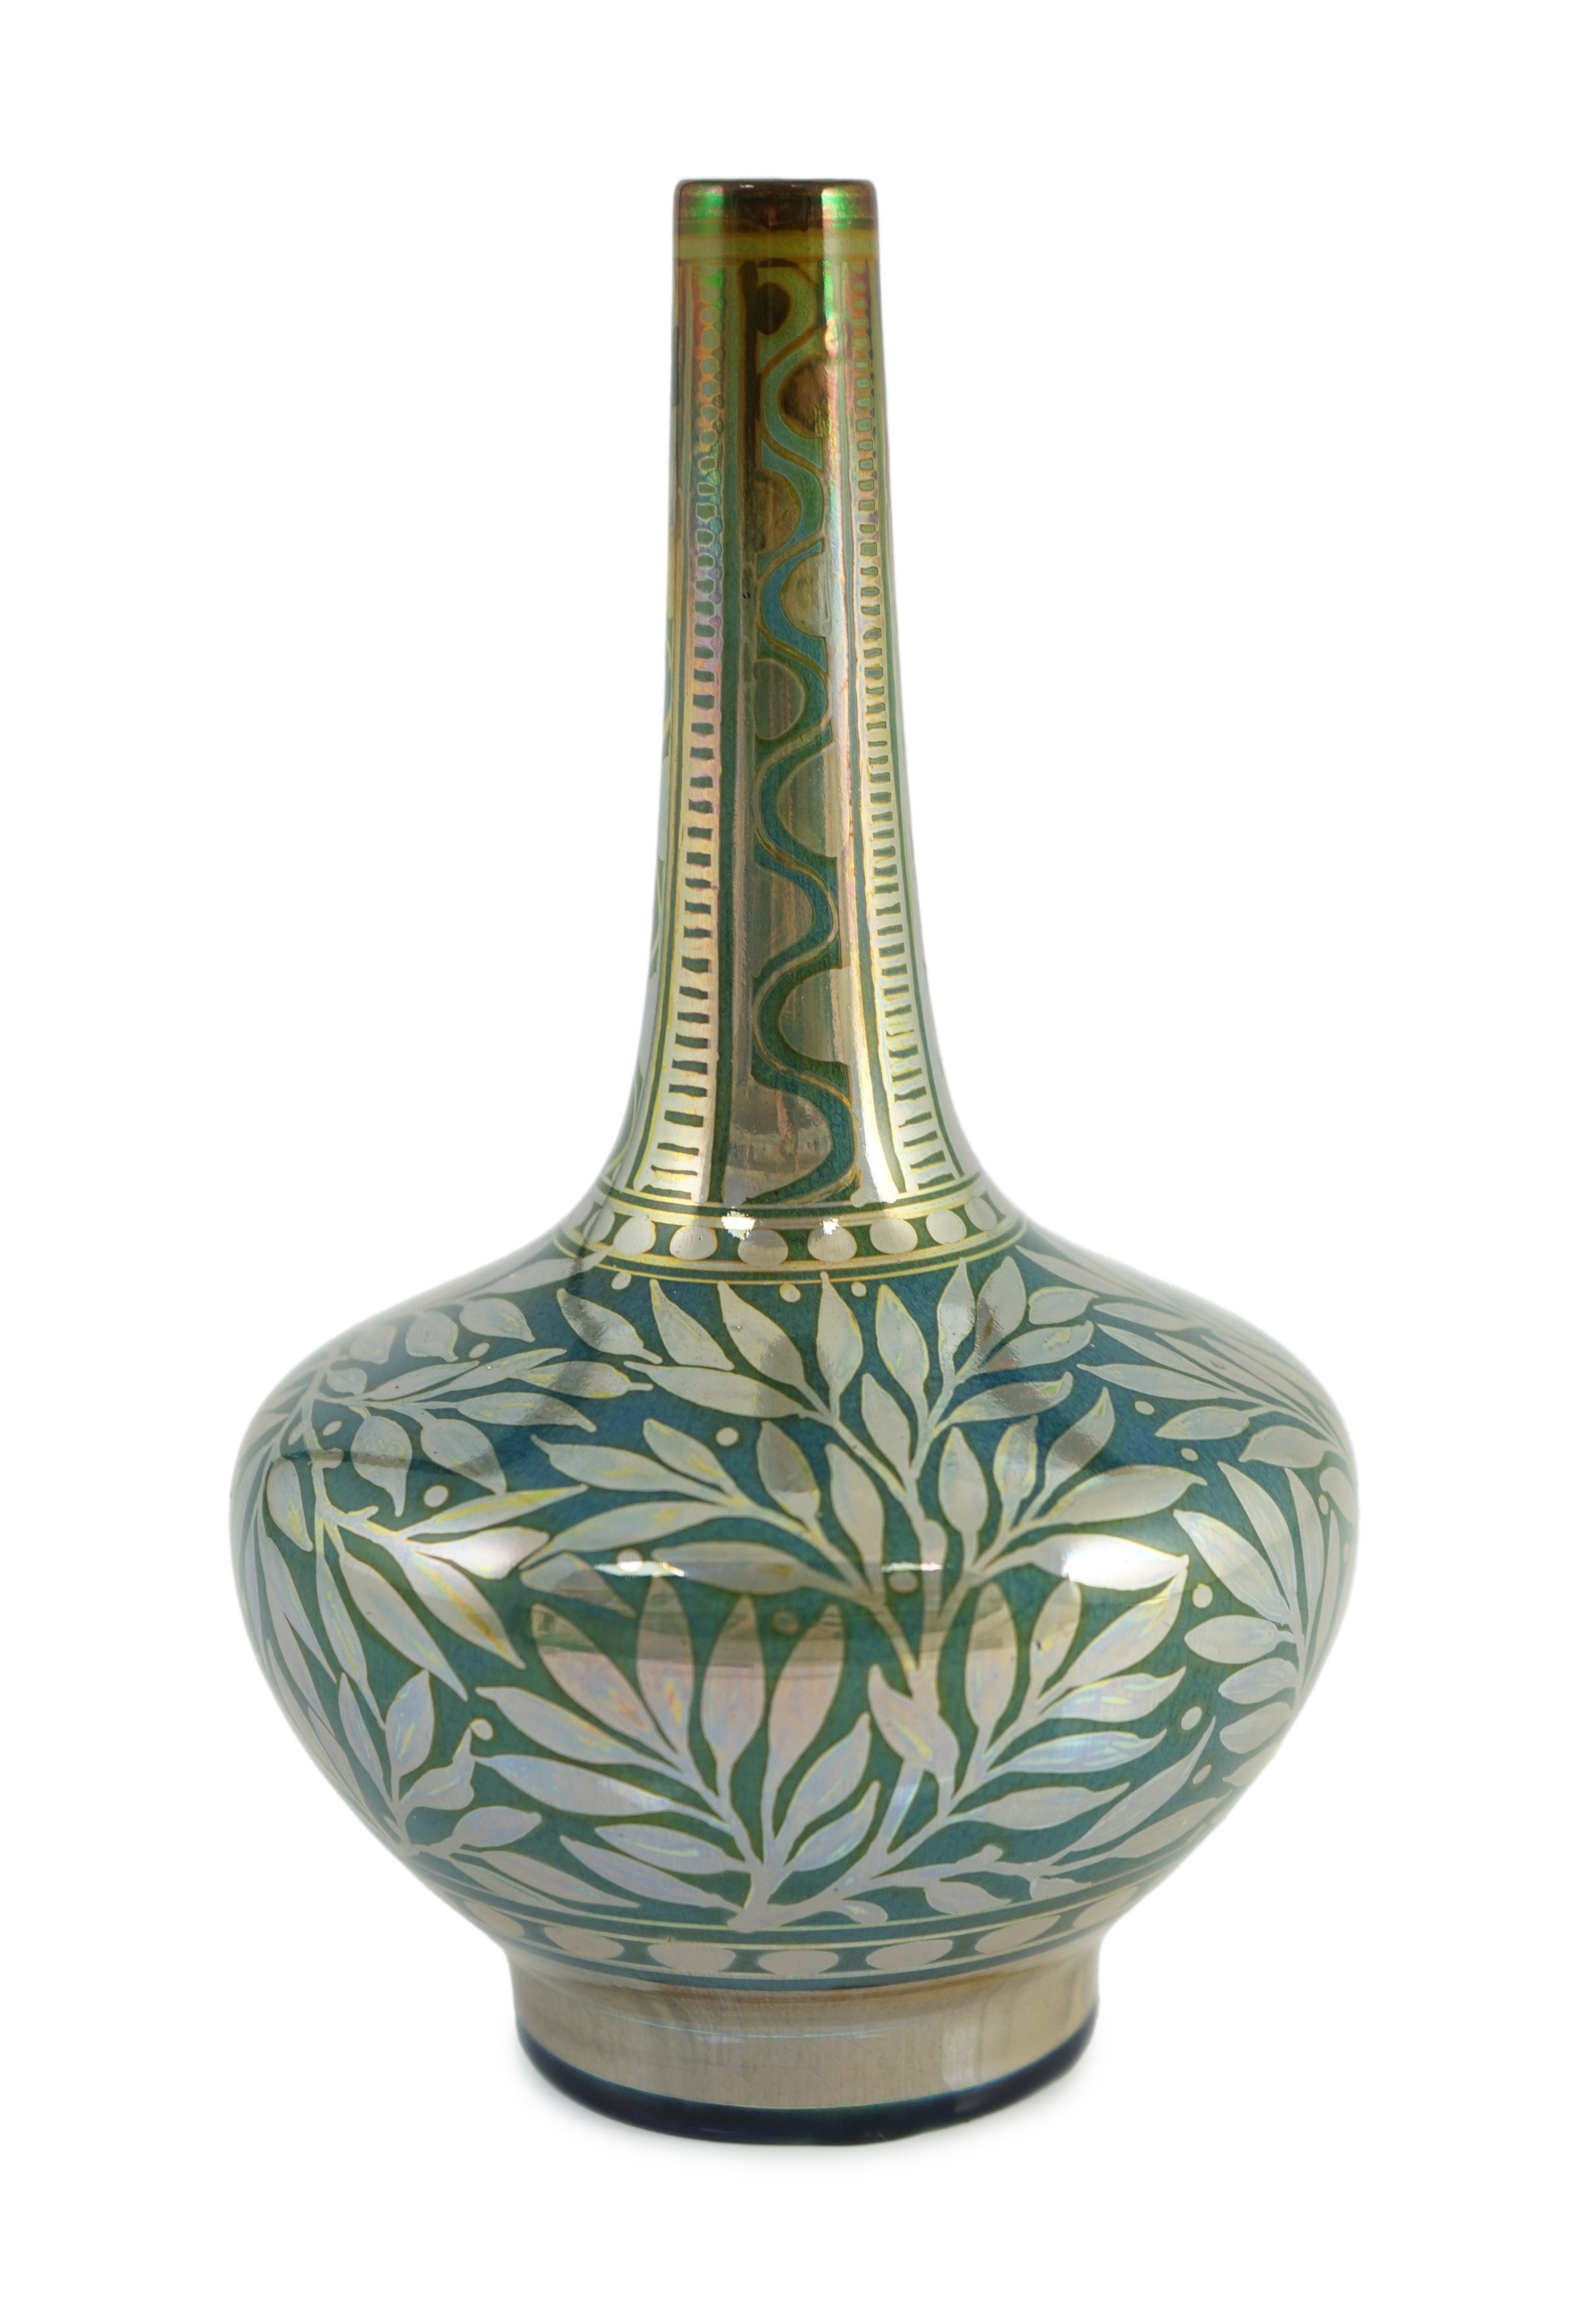 A Pilkington’s Lancastrian lustre bottle vase, by William S. Mycock, painted in silver lustre with